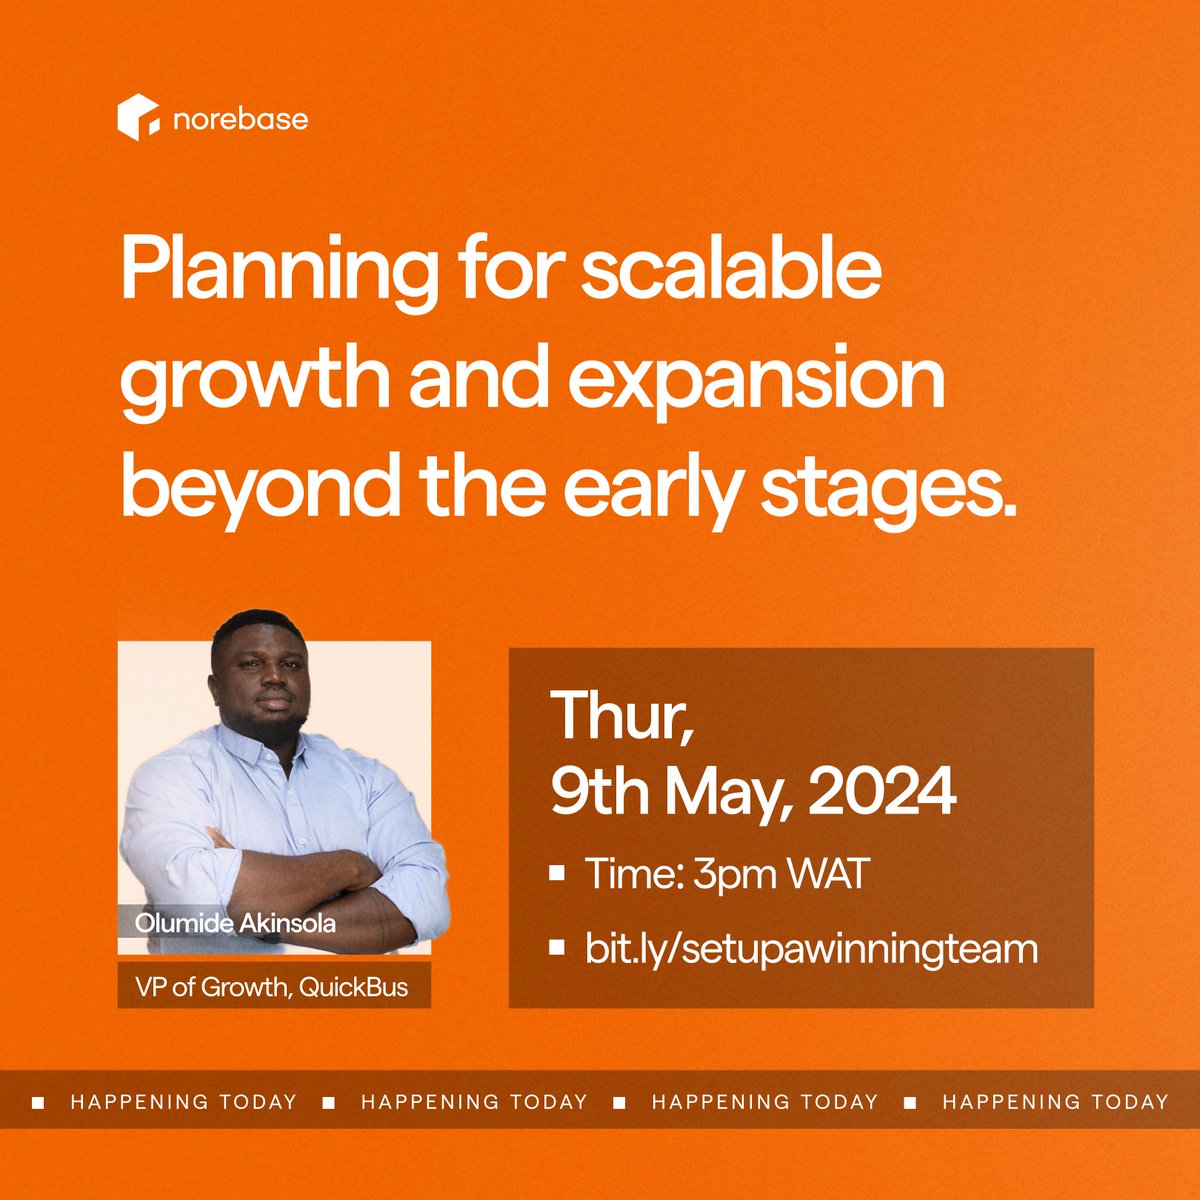 By 3pm WAT today @gboukzi will be sharing growth strategies for scaling and expansion.

To be part of this conversation, register here - bit.ly/scalablegrowth

See you by 3!

#Norebase #StartupFounder #FounderSeries